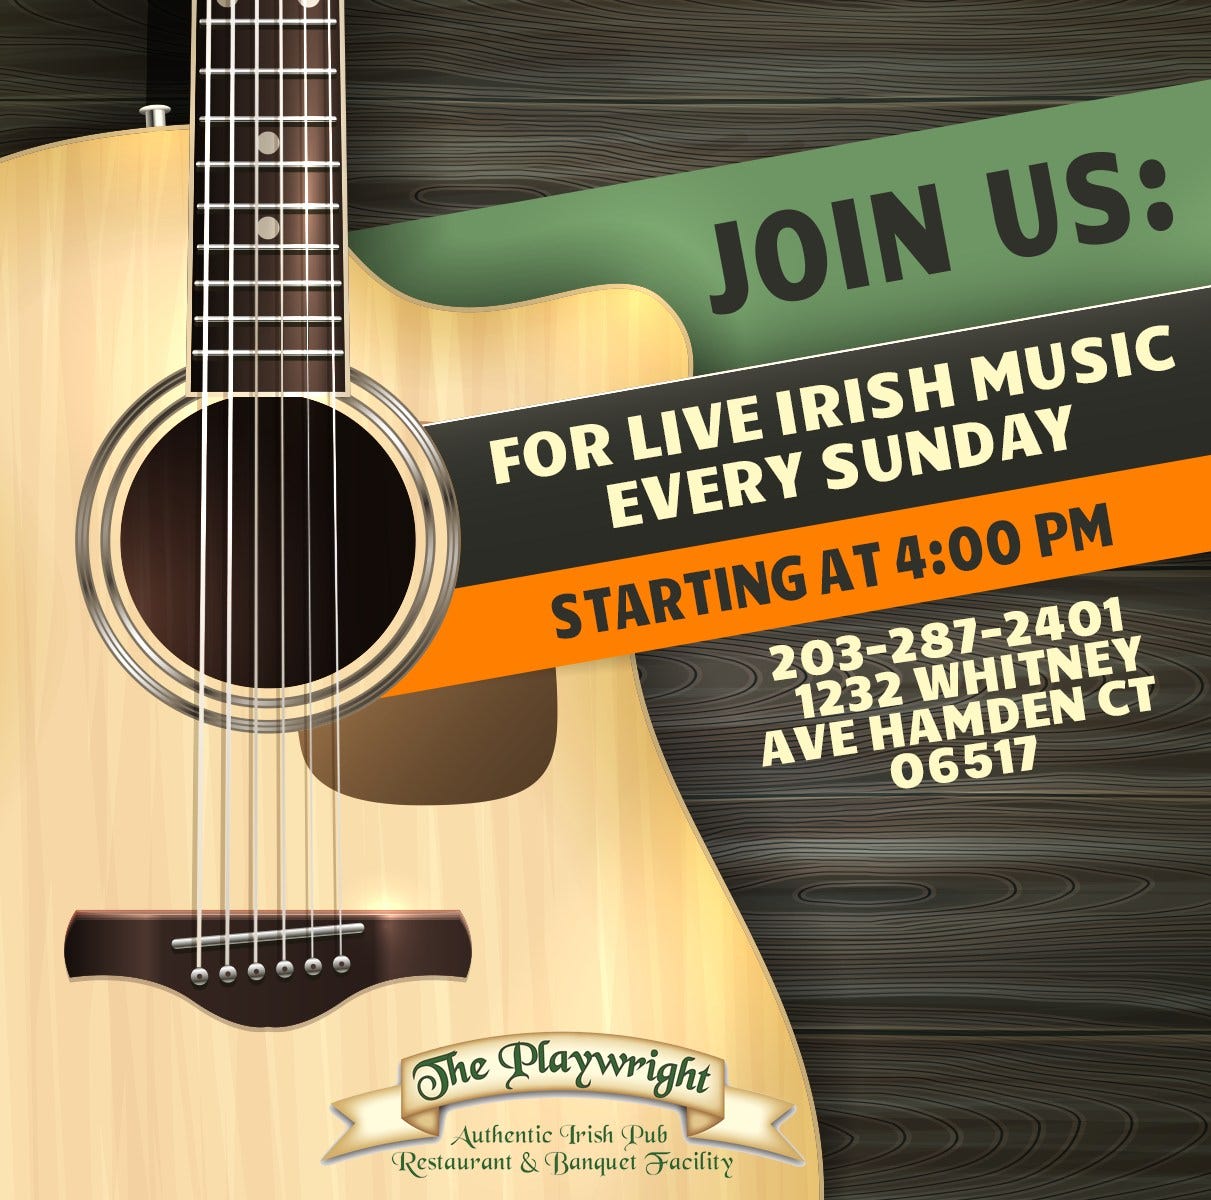 May be an image of guitar and text that says 'JOIN US: FOR LIVE IRISH IRISH MUSIC EVERY SUNDAY STARTING AT 4:00 PM 1232 AVE HAMDEN 203-287-2401 WHITNEY CT 06517 The Playwright Authentic Irish Pub Restaurant & Banquet Facility'